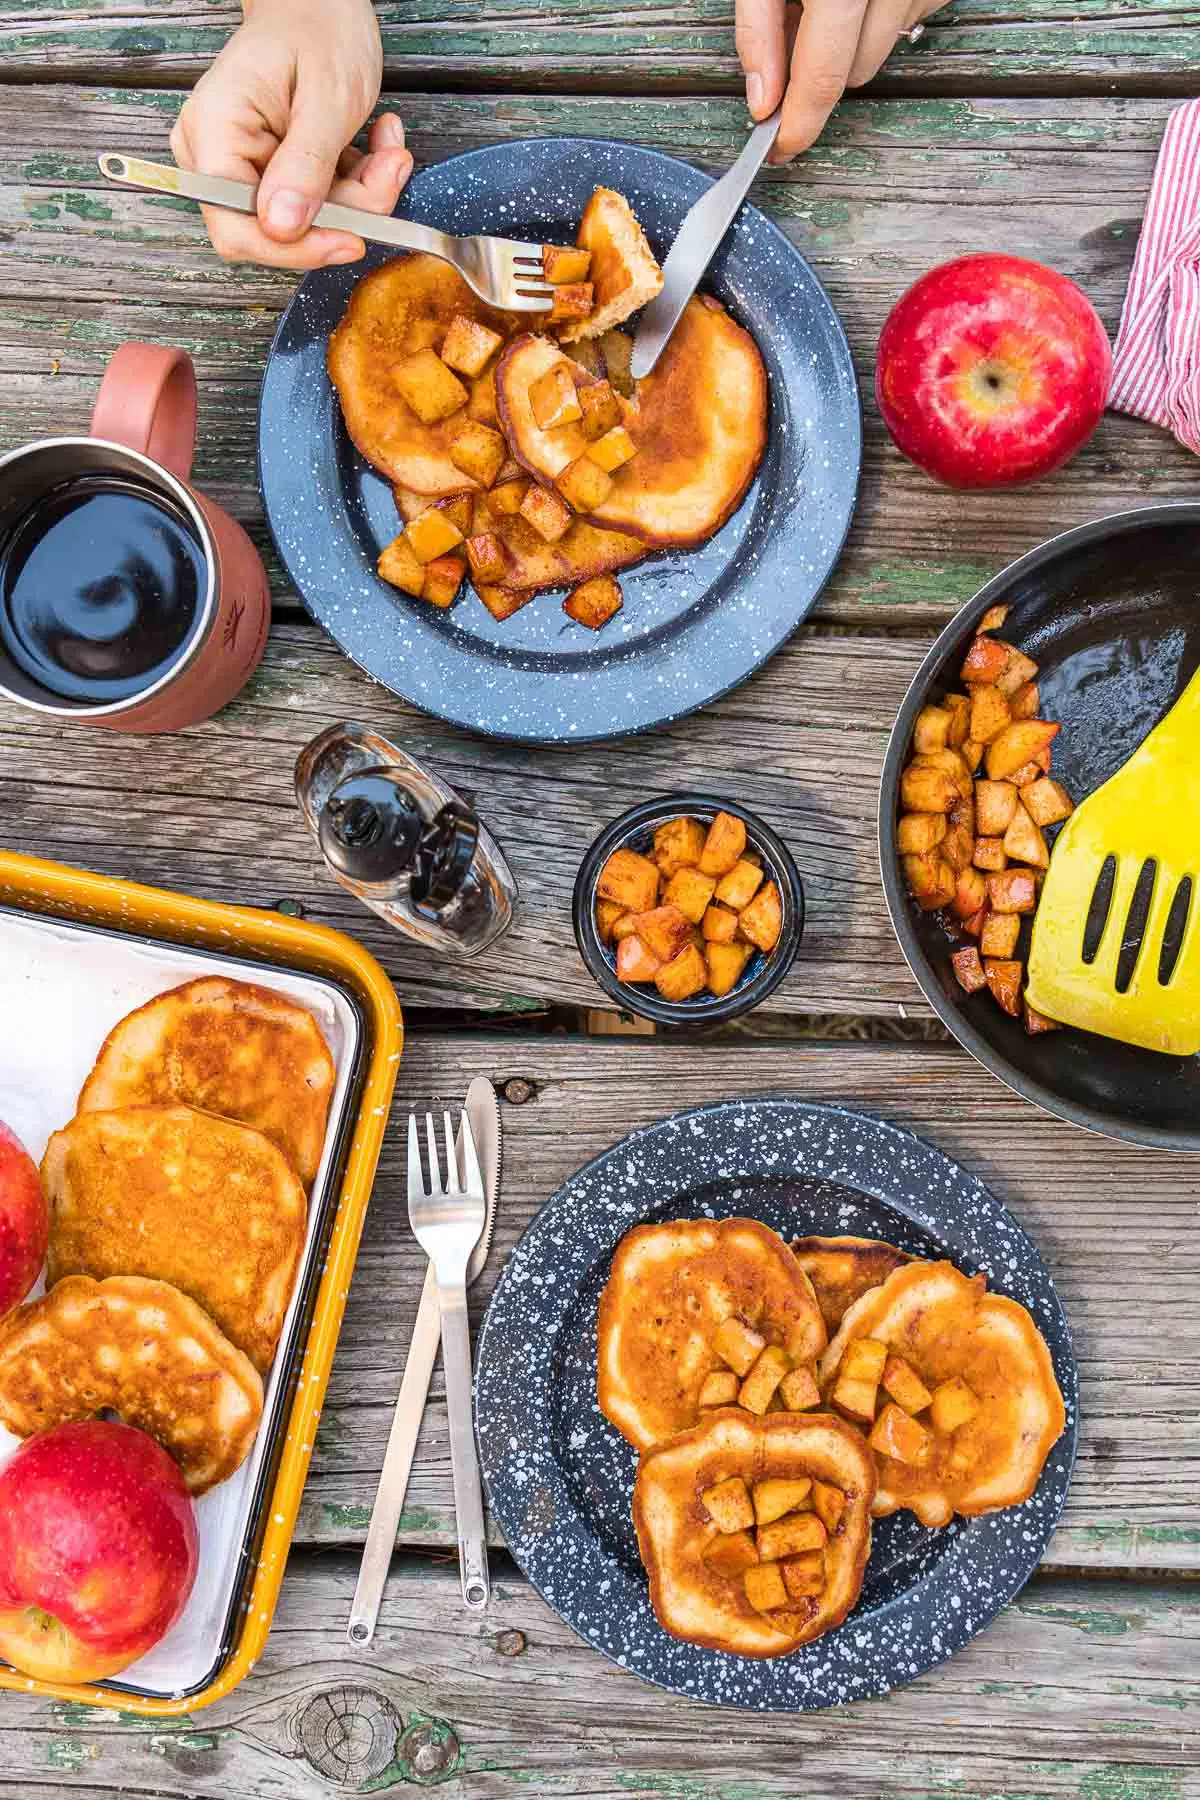 A table scene with two plates of pancakes, coffee cups, and a serving dish with more pancakes in it.